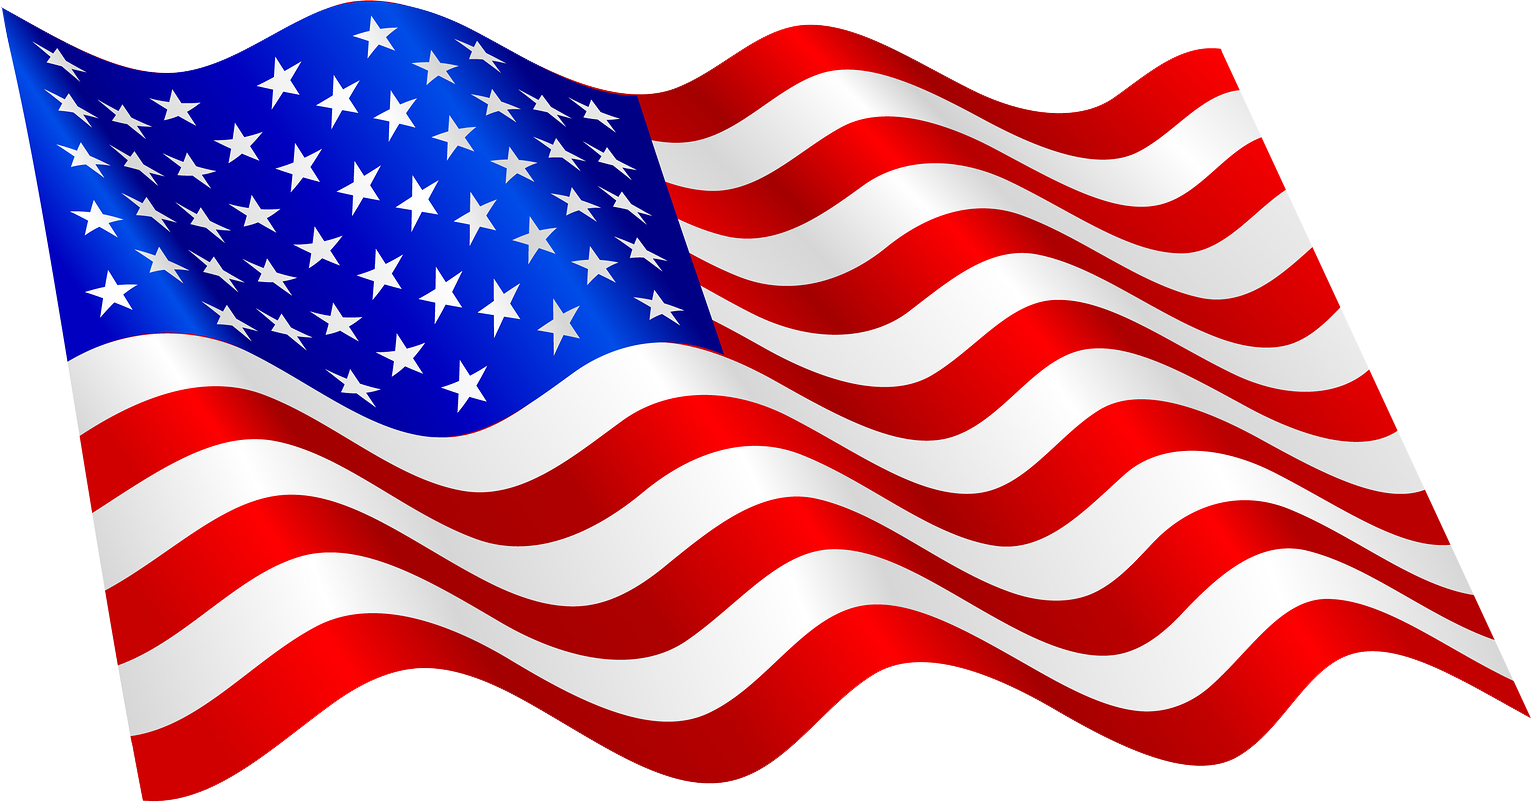 United States Of America Flag Png Transparent Images - American Flag Transparent, Transparent background PNG HD thumbnail